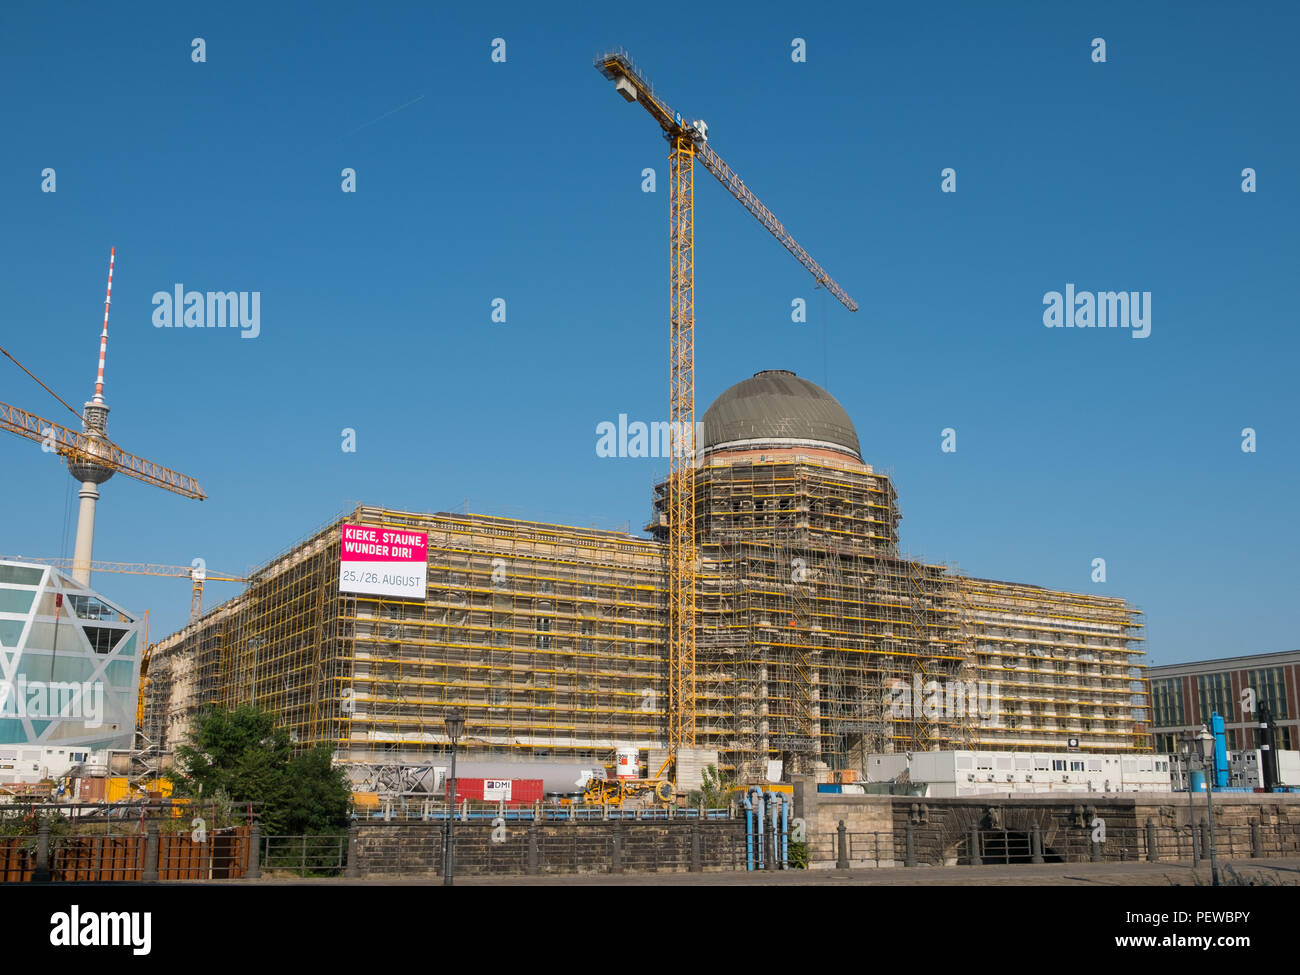 Berlin, Germany - august, 2018: Construction of the Berlin Palace (German: Berliner Schloss or Stadtschloss) a.k.a.  City Palace in Berlin, Germany Stock Photo